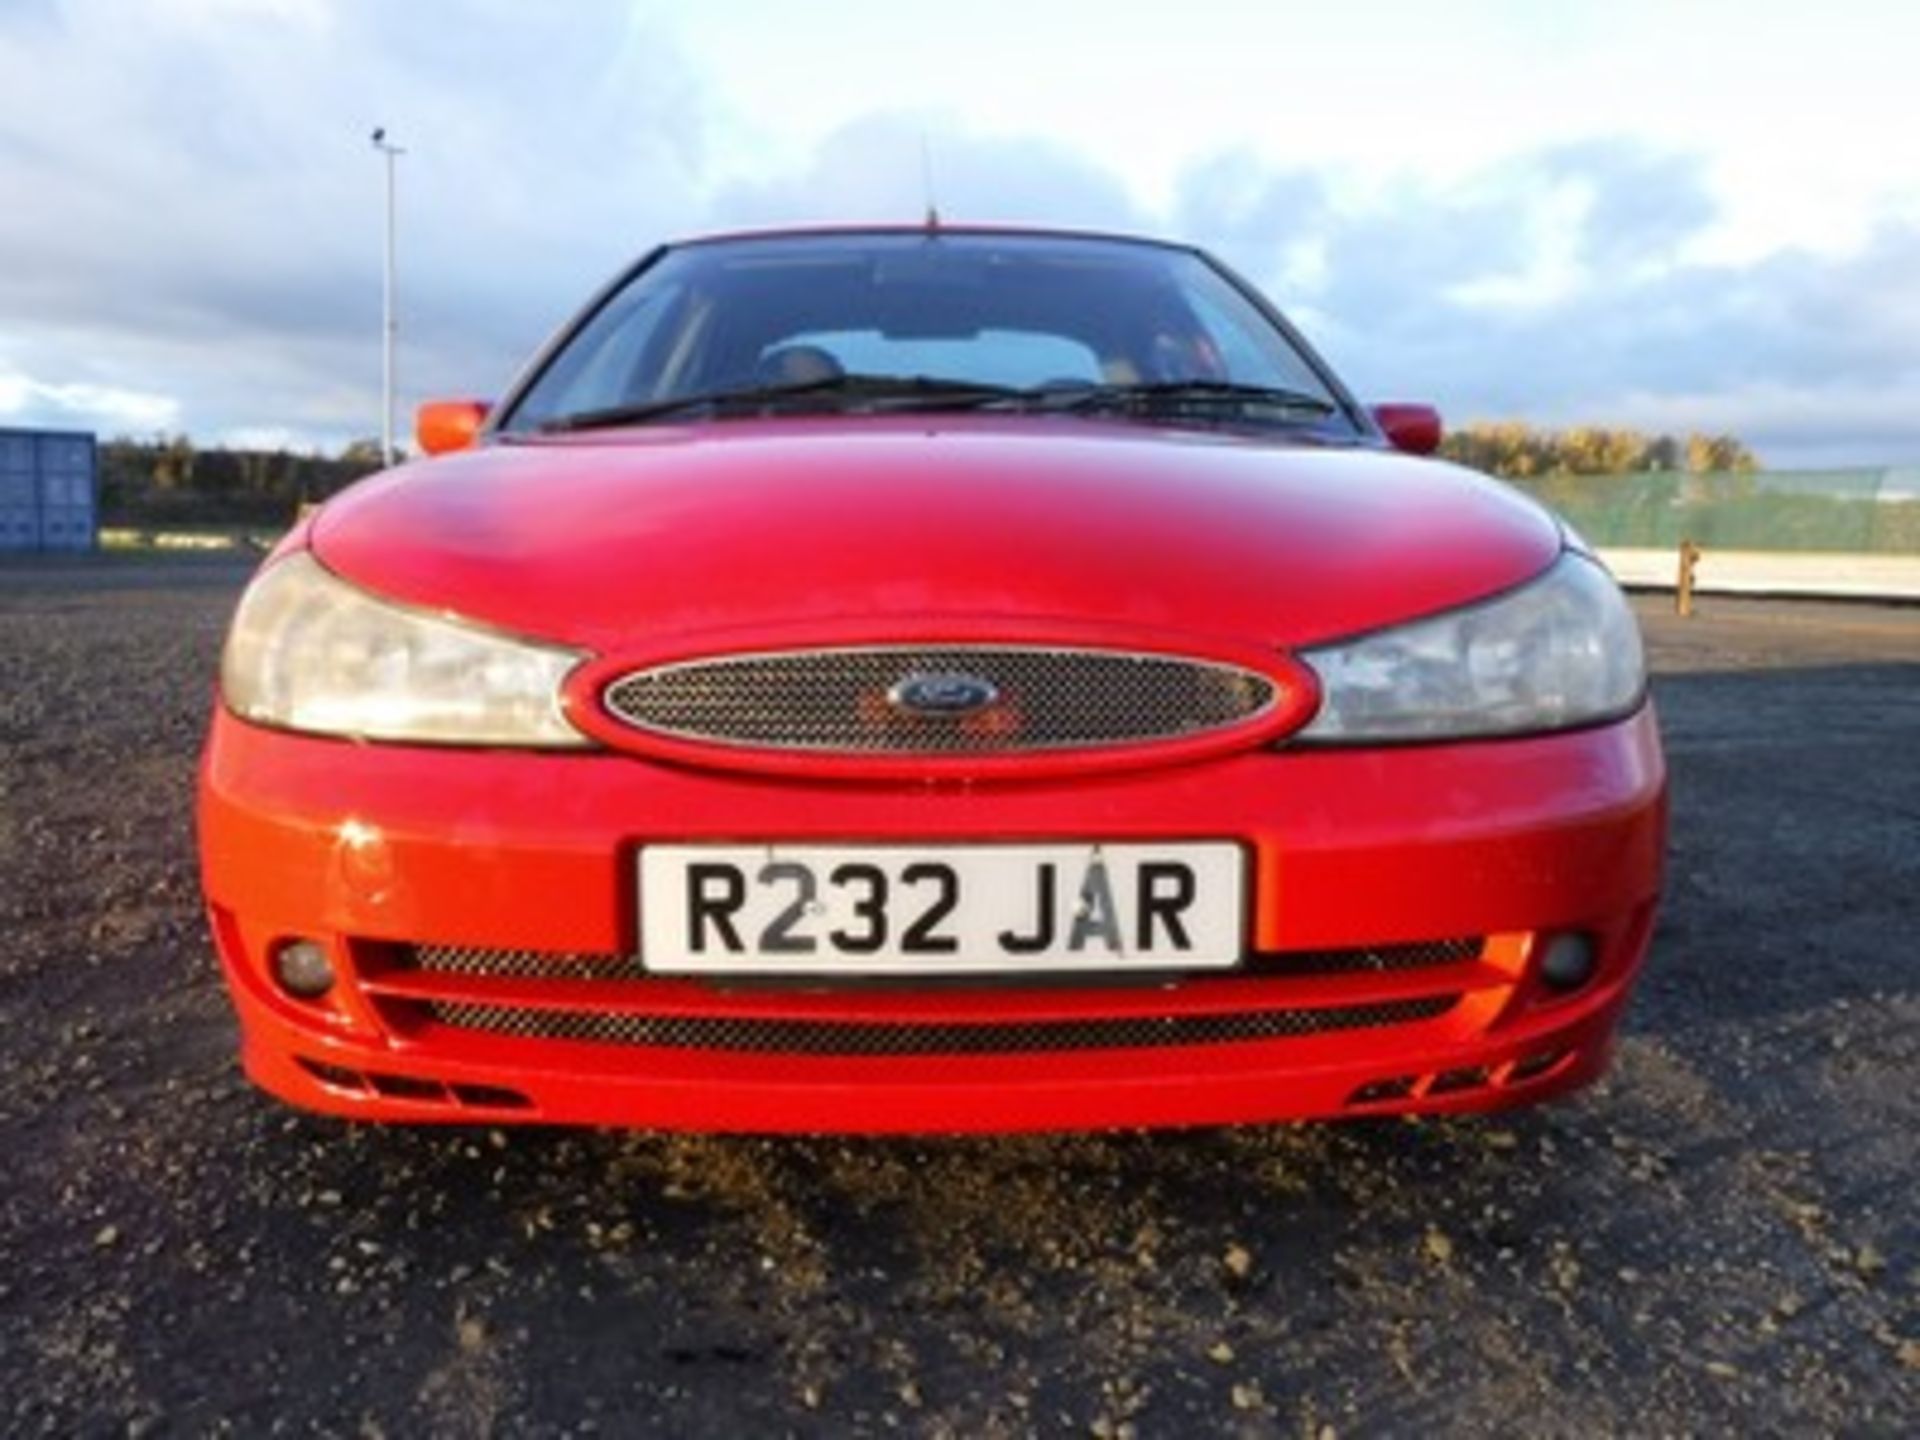 FORD MONDEO ST 24 V6 - 2497cc - Image 9 of 24